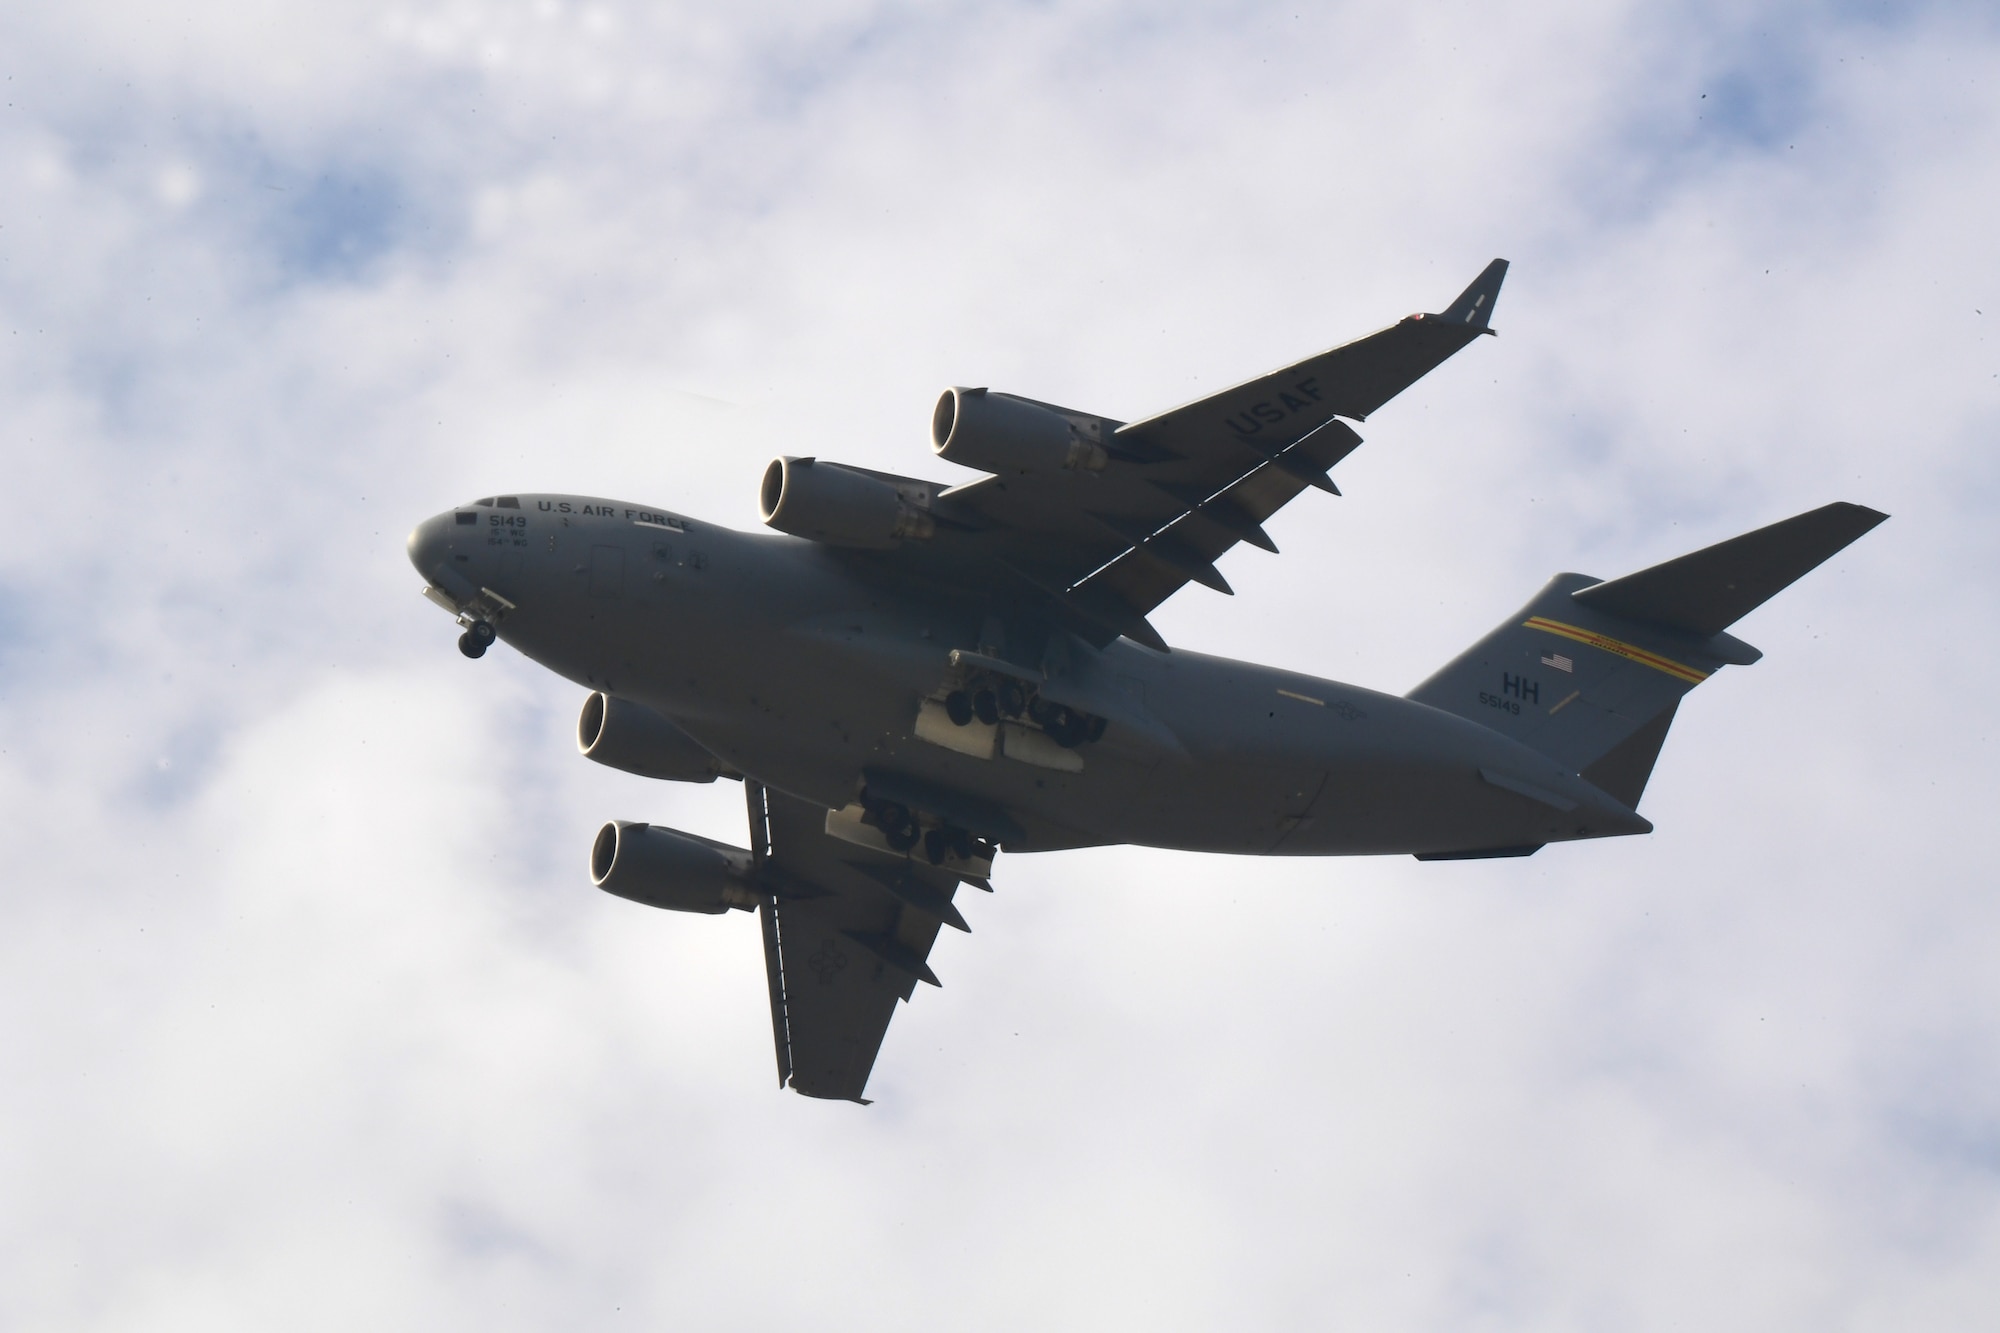 A C-17 Globemaster III assigned to the Pacific Air Forces C-17 Demonstration Team at Joint Base Pearl Harbor-Hickam, Hawaii, performs during the Seoul International Aerospace and Defense Exhibition 2019 at the Seoul Airport, Republic of Korea, October 17, 2019.